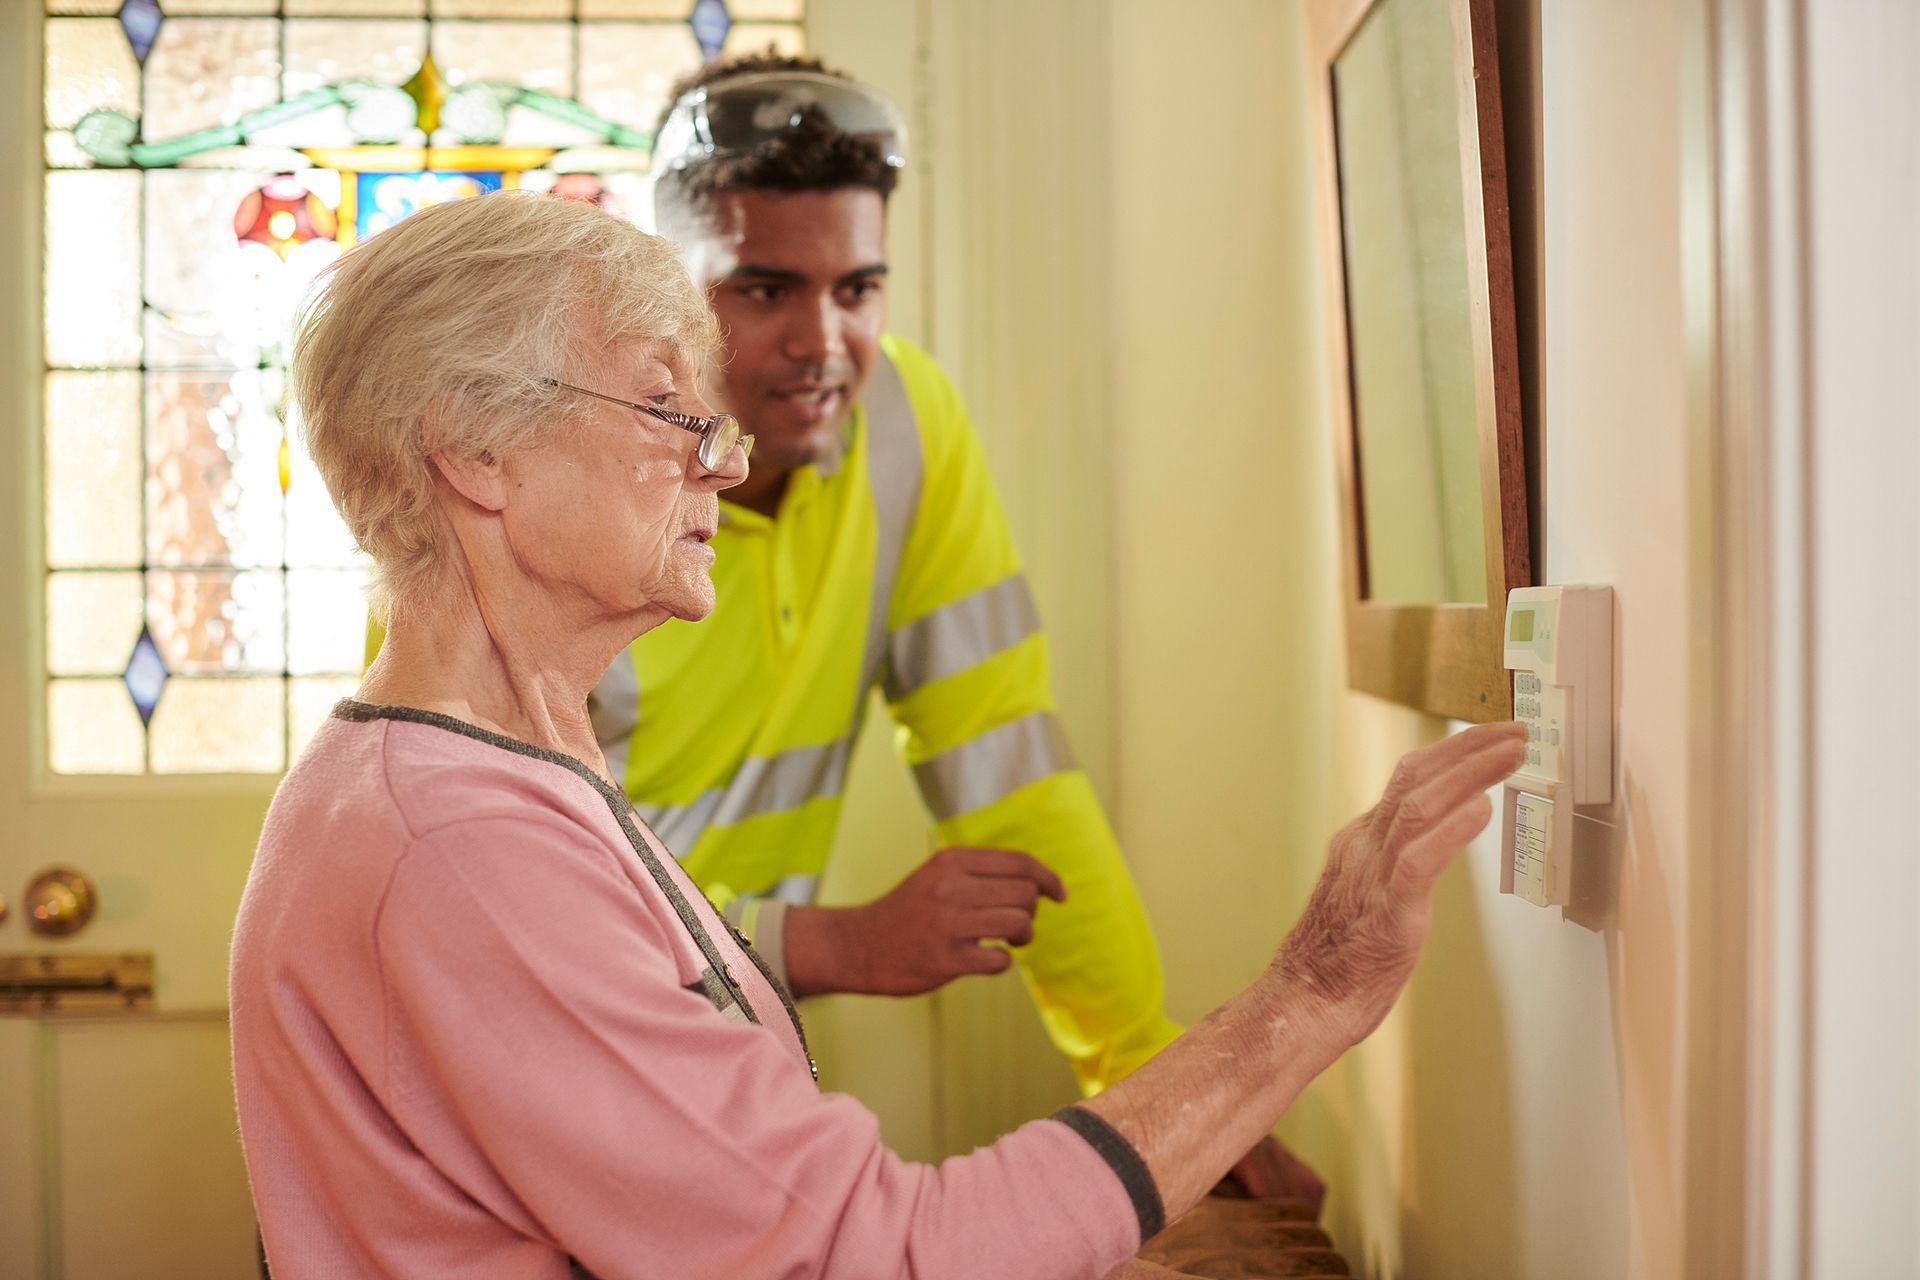 An elderly woman is adjusting a thermostat while a man looks on.